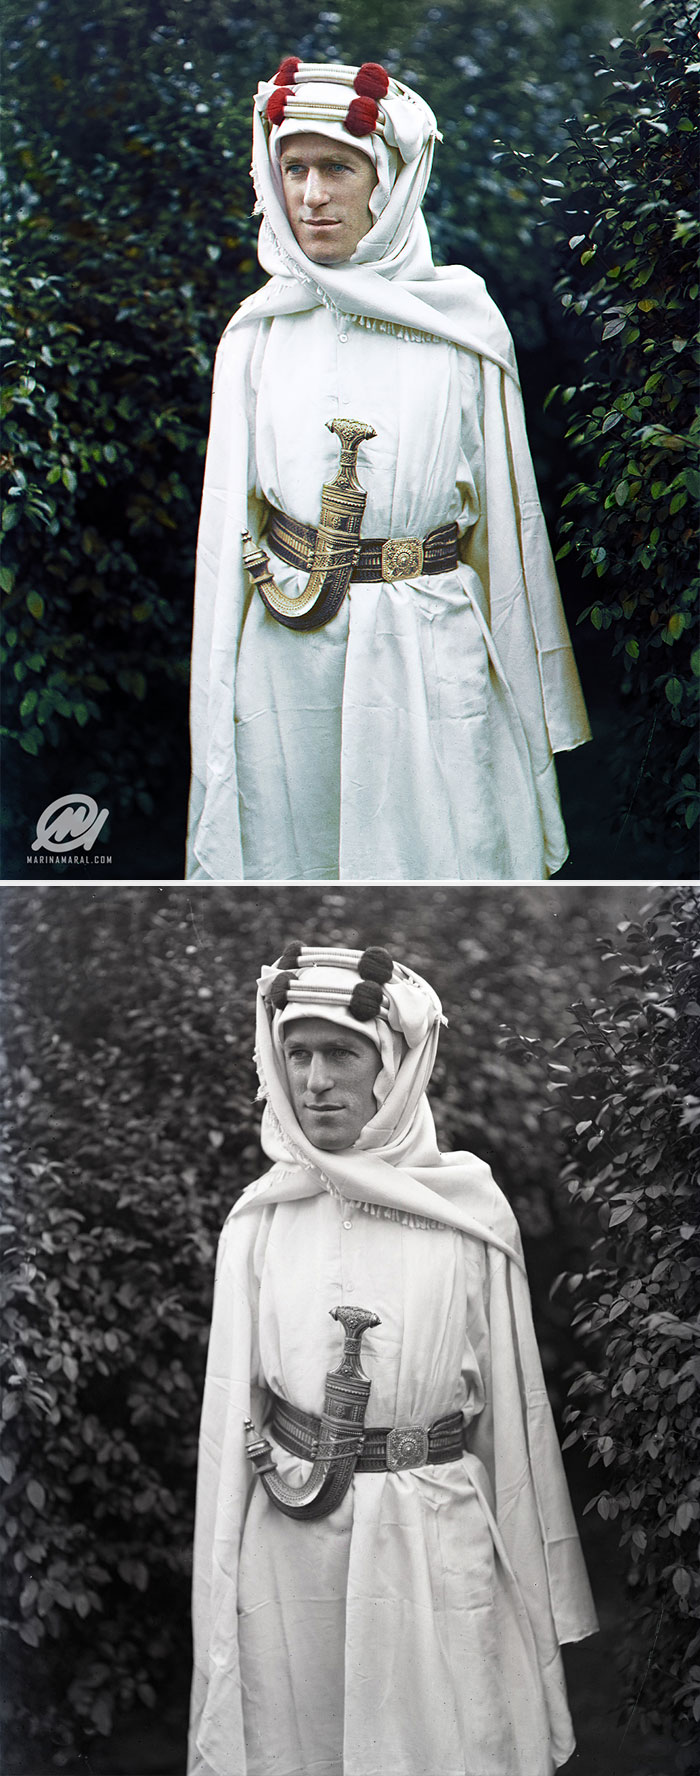 Colonel Thomas Edward Lawrence, Also Known As Lawrence Of Arabia